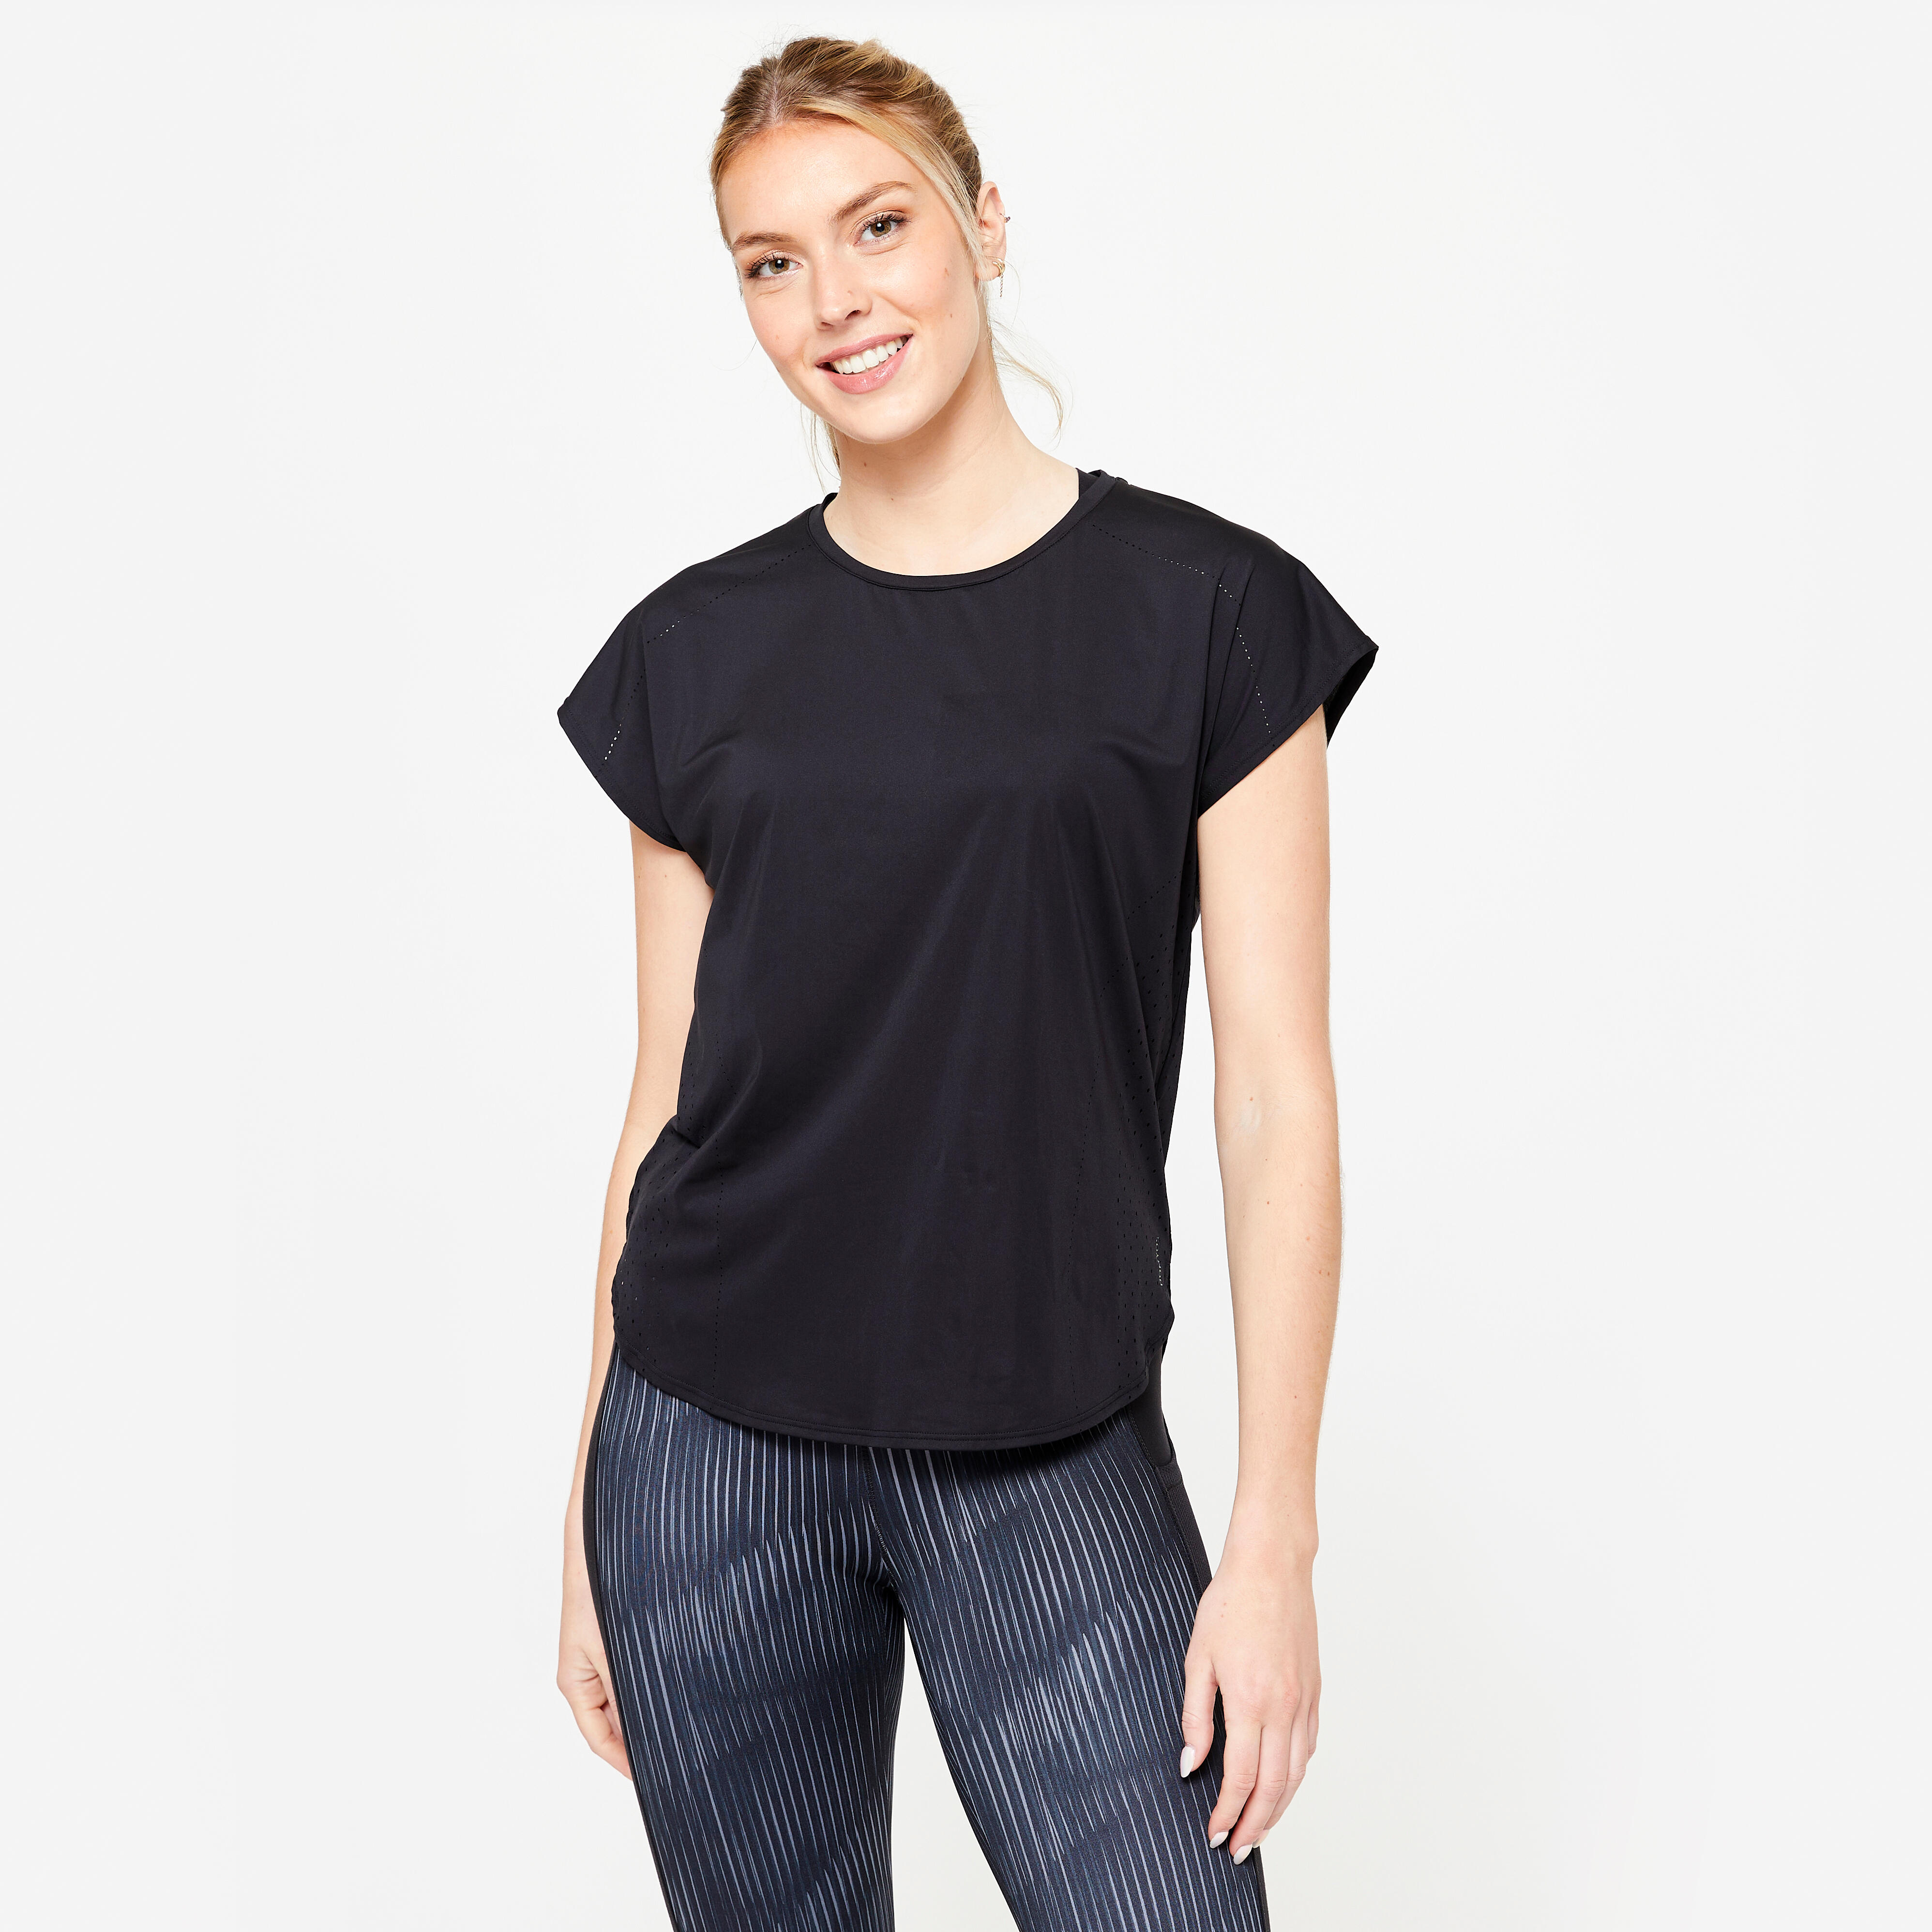 Women’s Loose-Fit Fitness T-Shirt